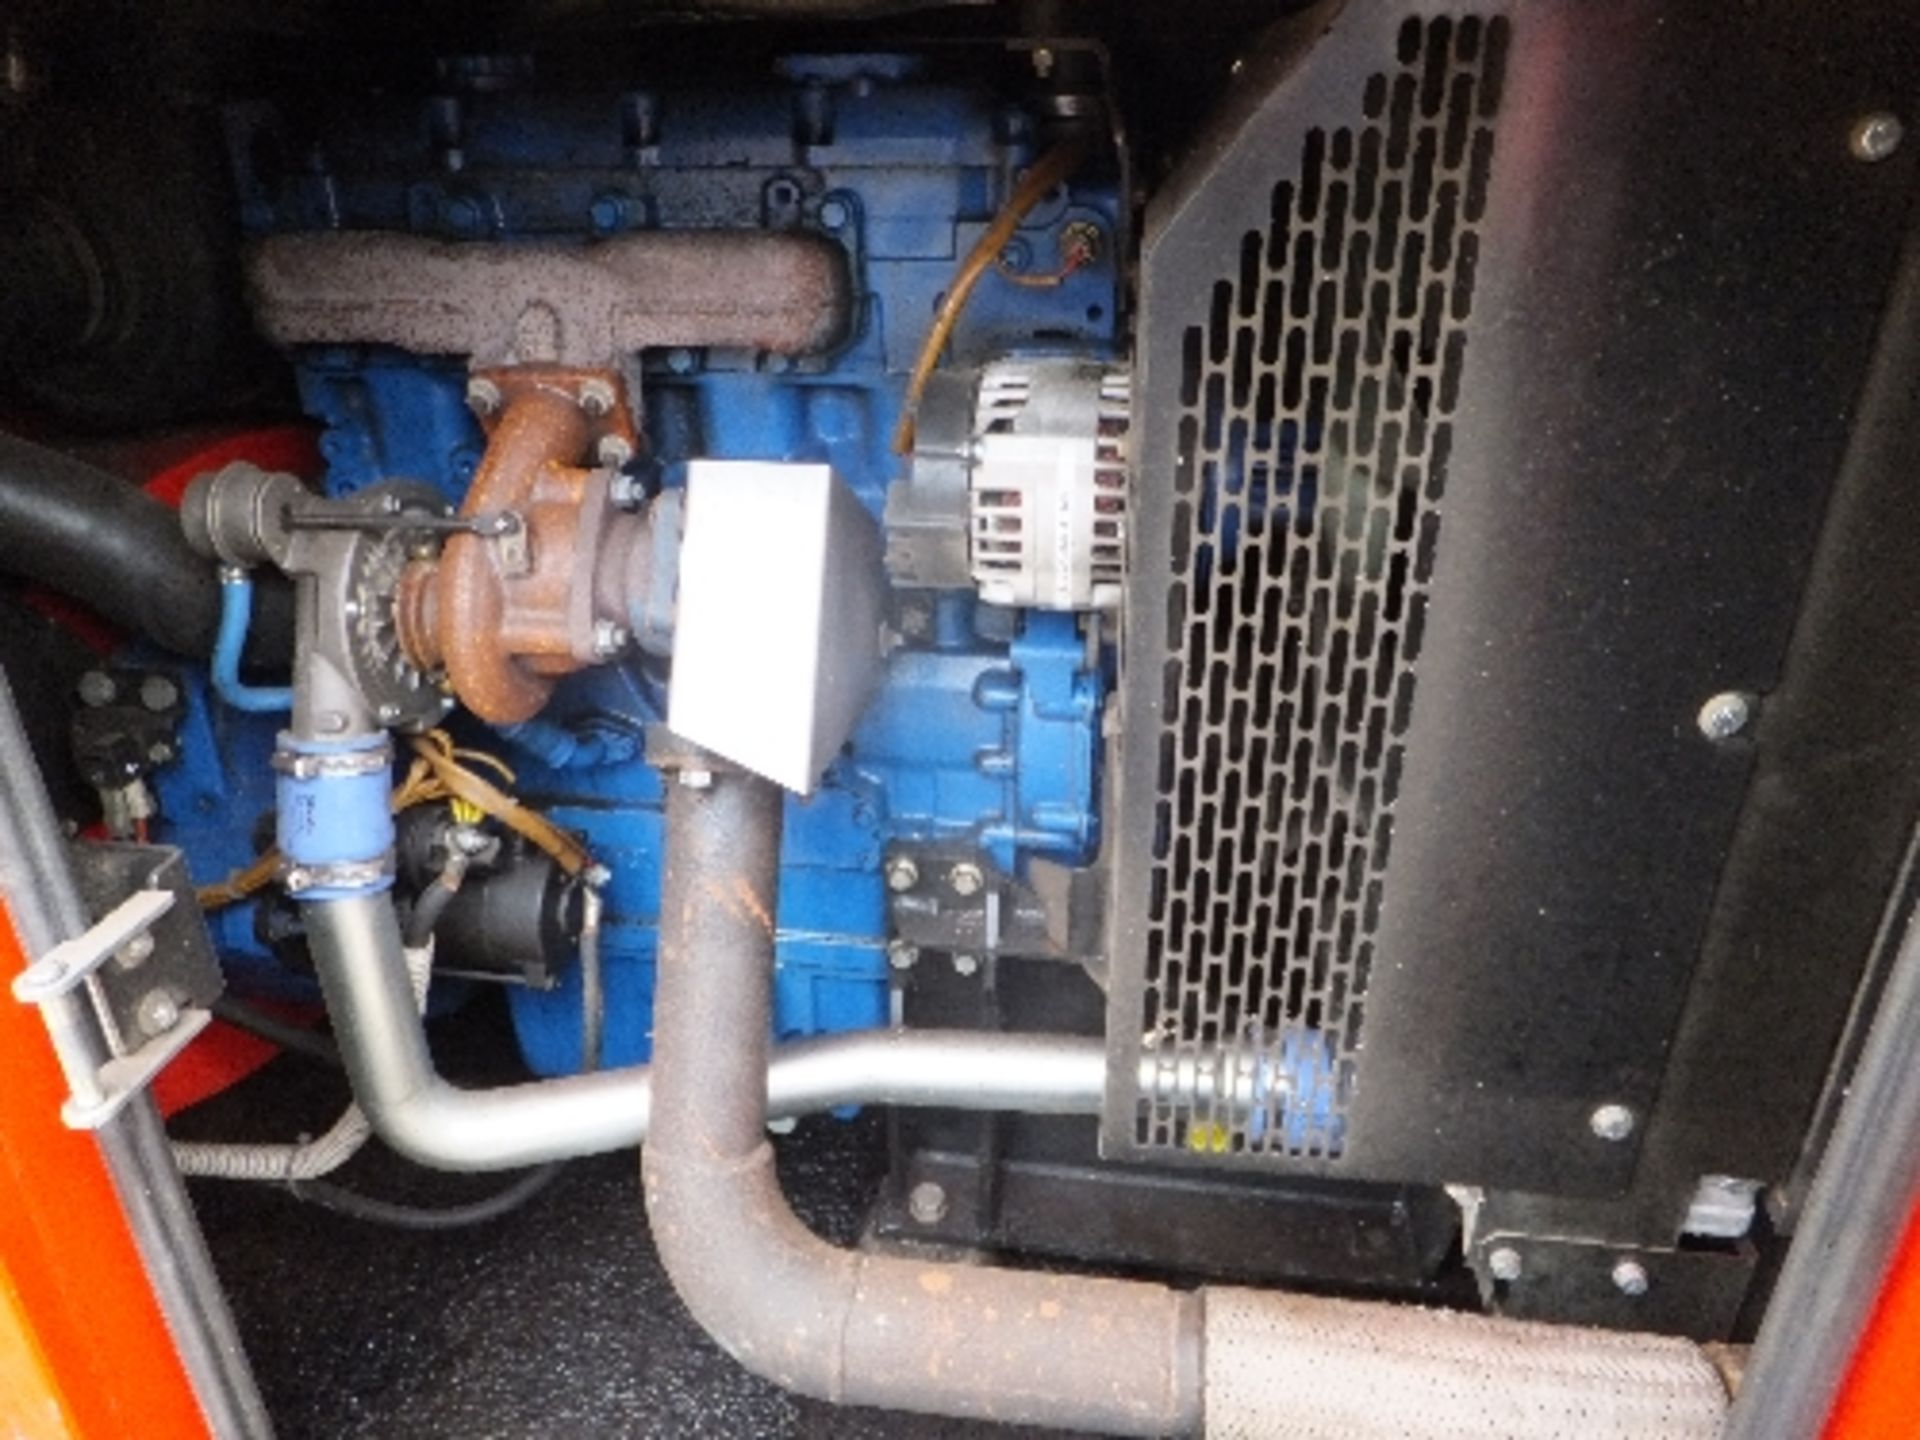 Genset MG115SS-P 100kva generator
Complete - parts of panel missing
HF6109 - Image 3 of 4